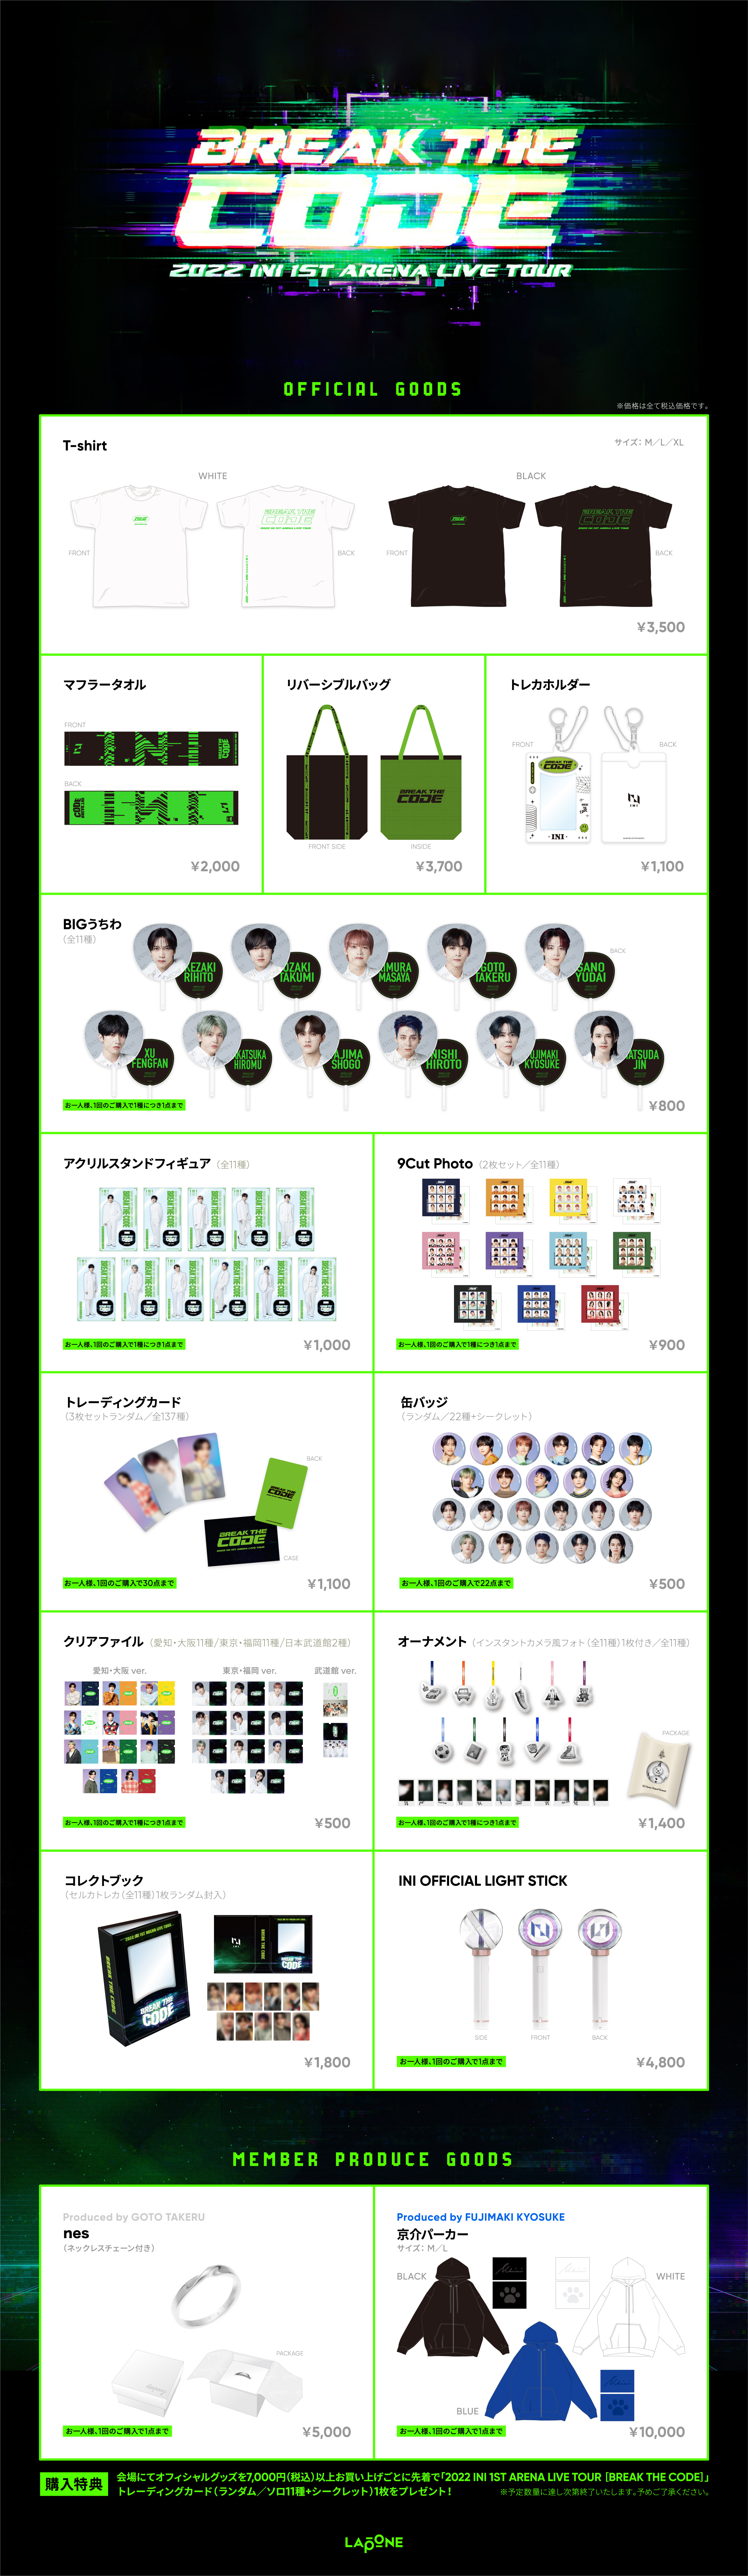 2022 INI 1ST ARENA LIVE TOUR [BREAK THE CODE]」 Official Goods 